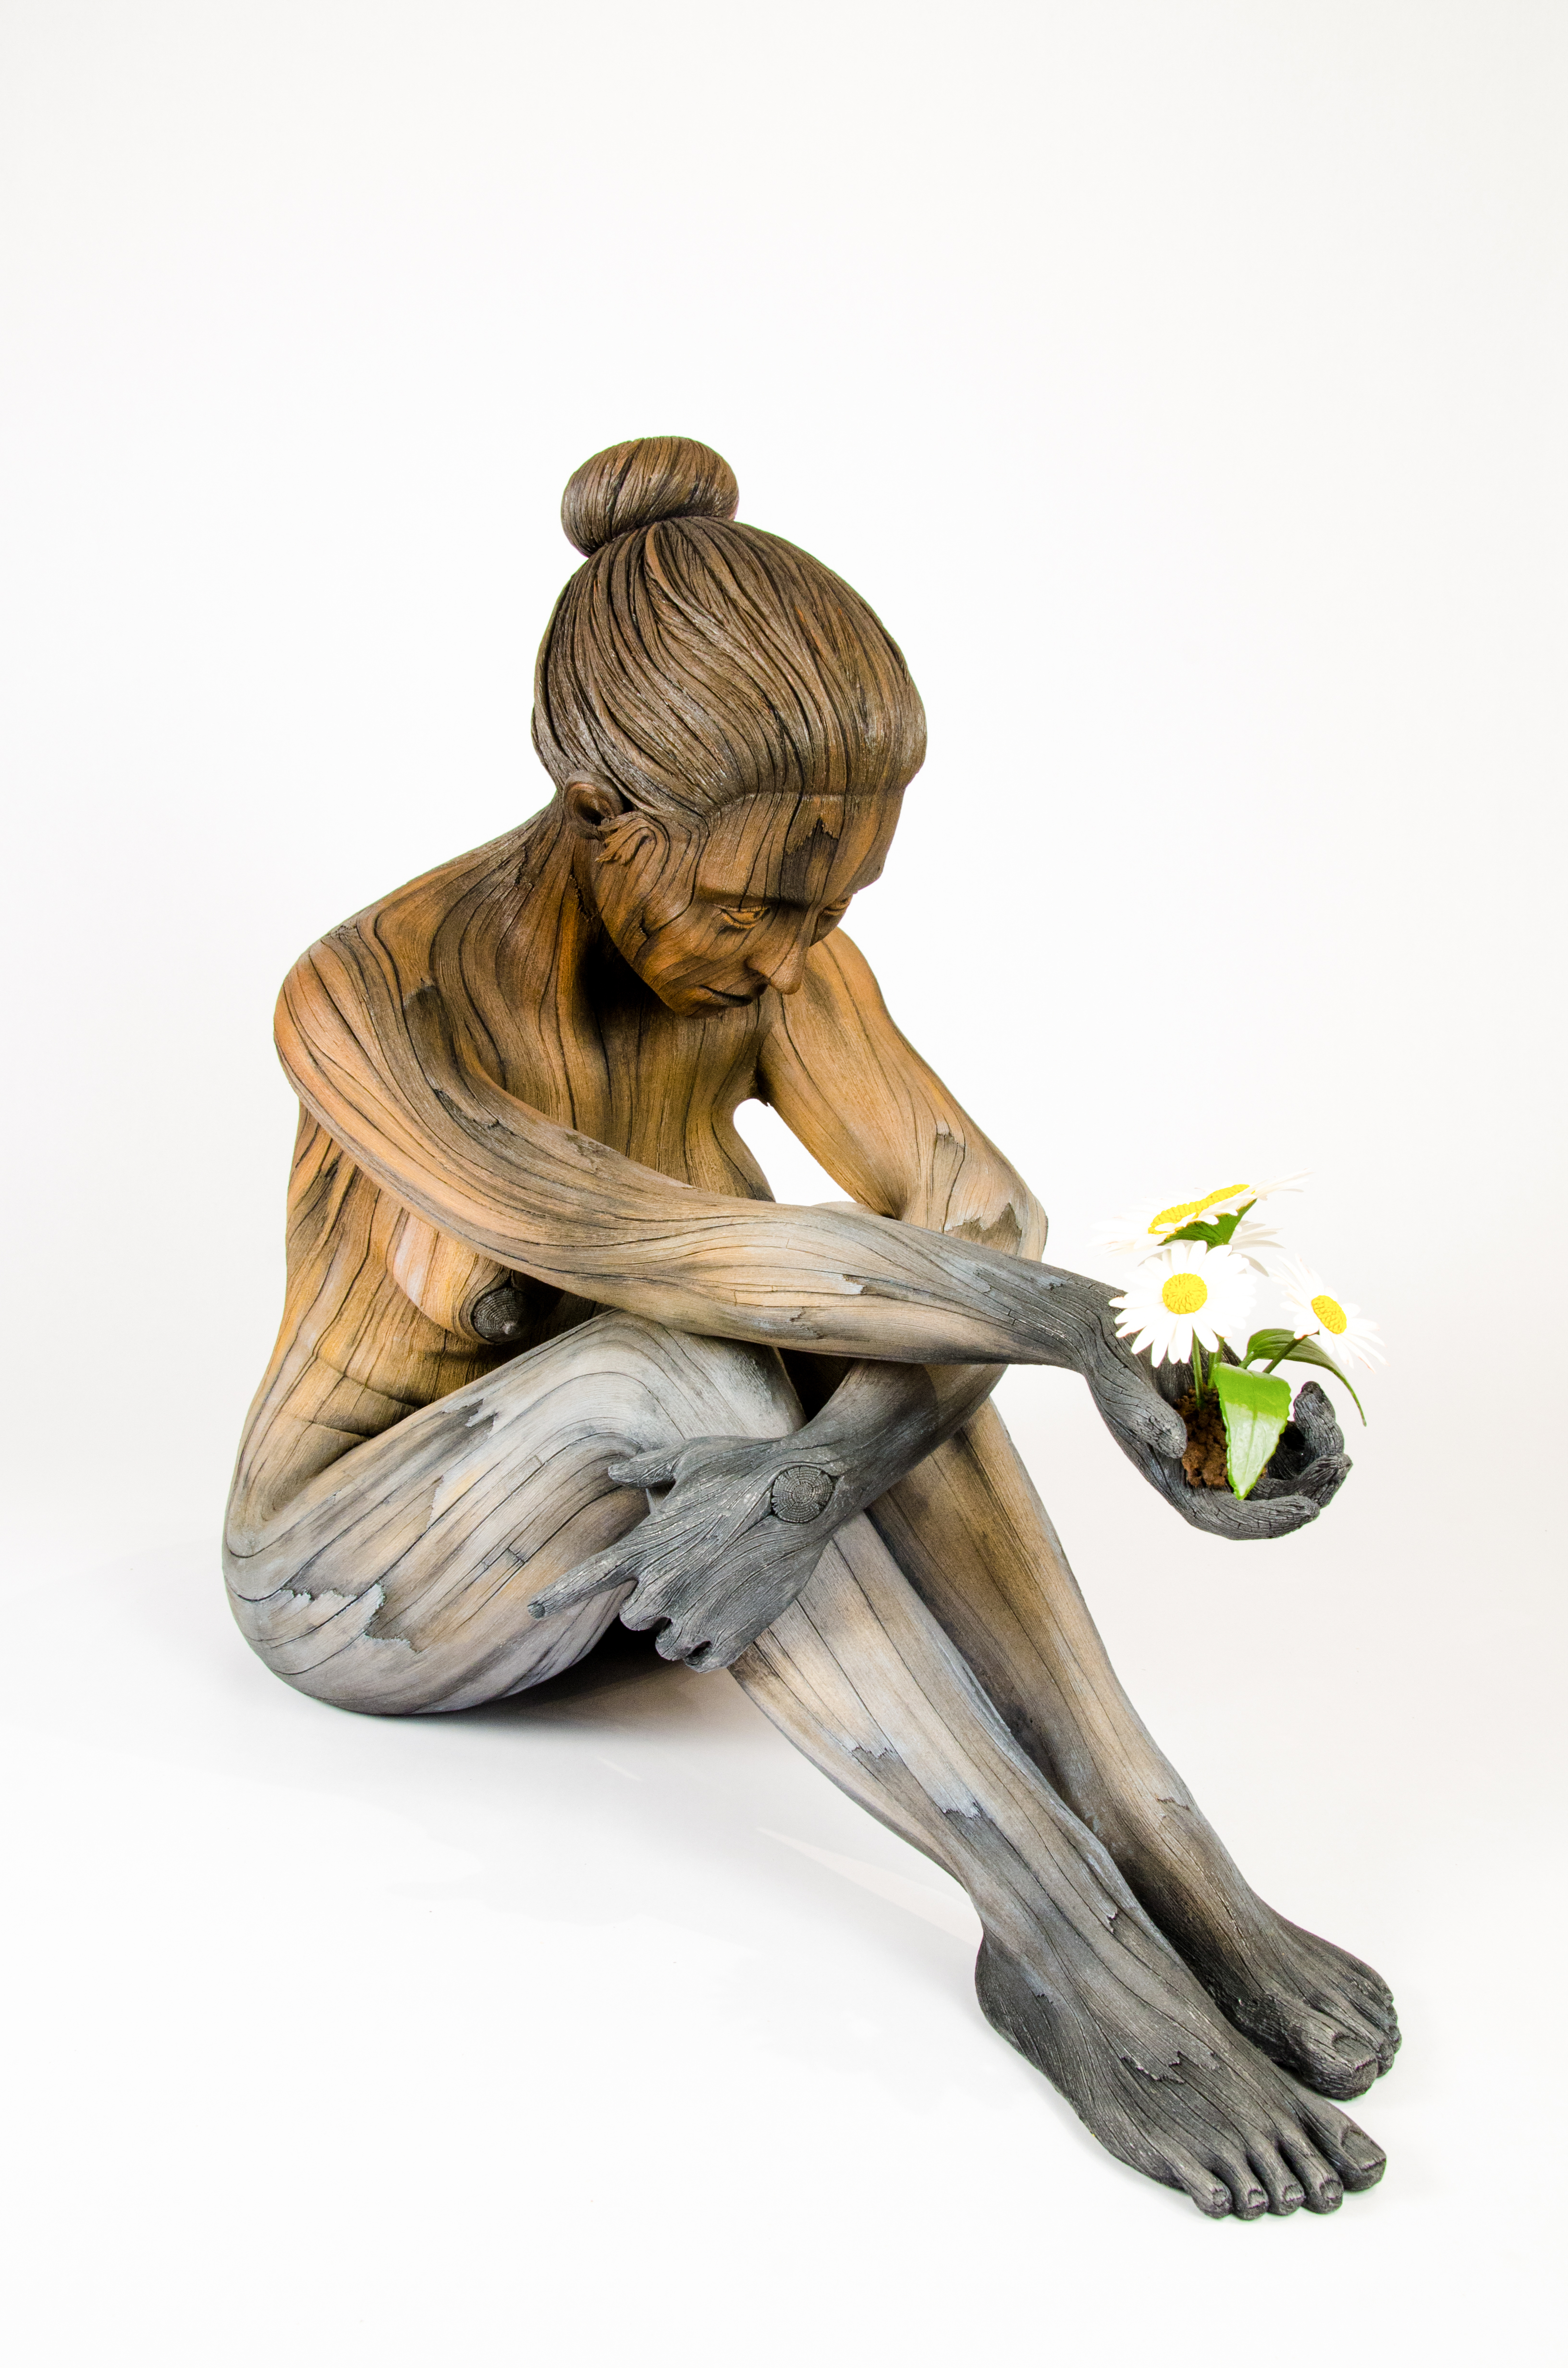 Hyperrealistic Sculptures Make Clay Look Like Wooden Humans